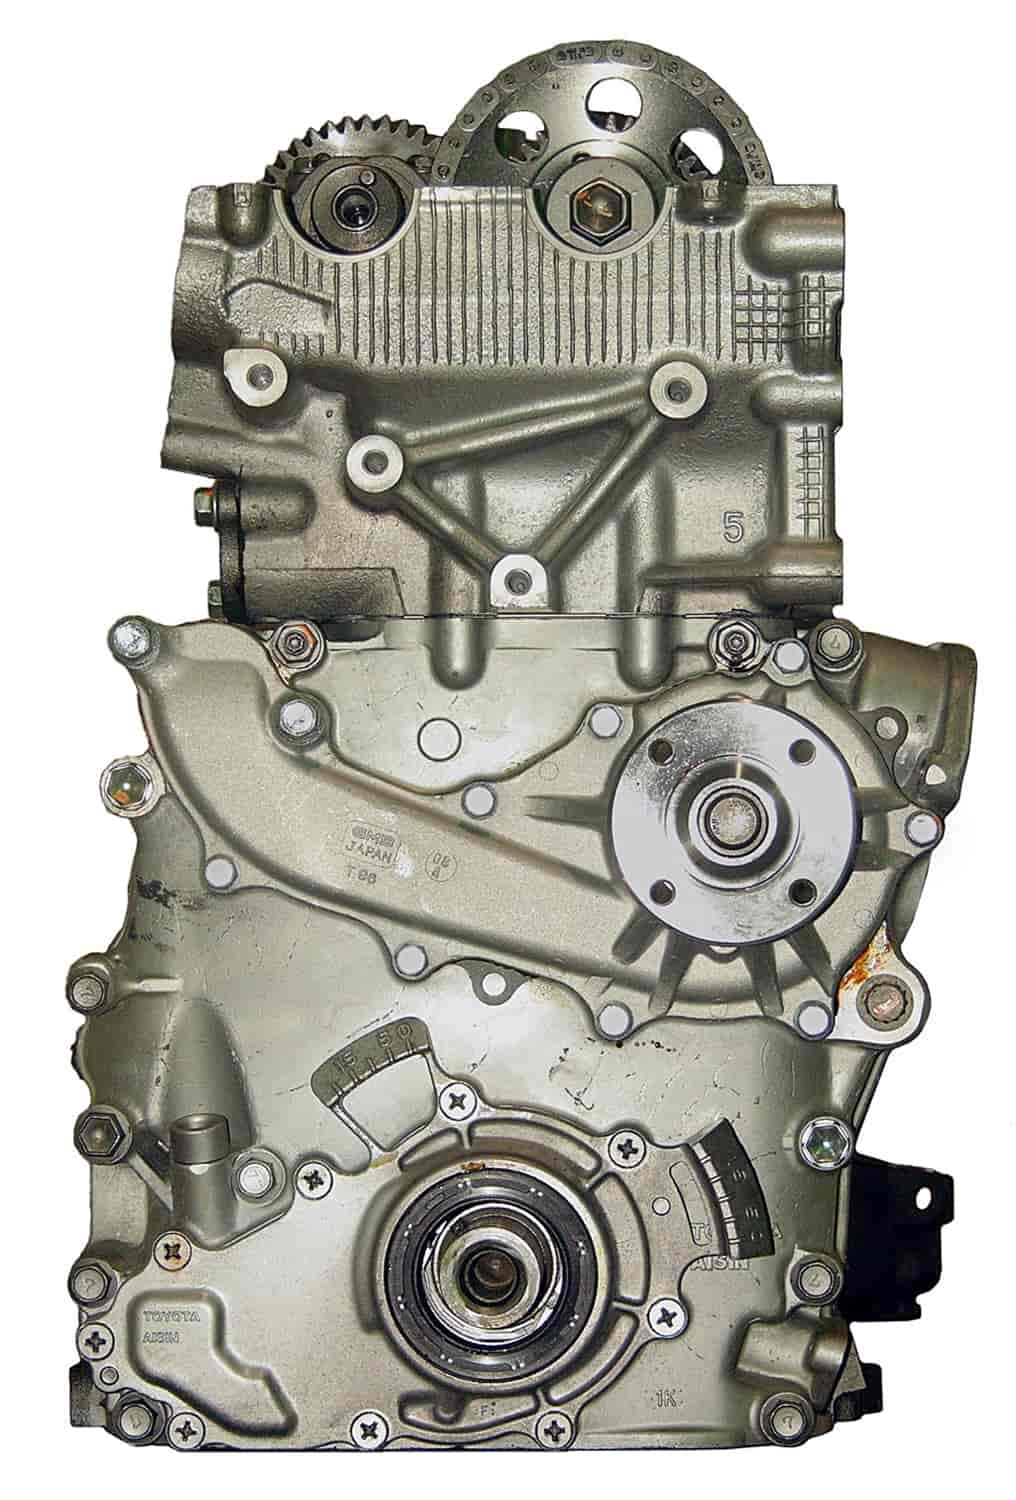 Remanufactured Crate Engine for 1997-2000 Toyota Tacoma with 2.4L L4 2RZFE